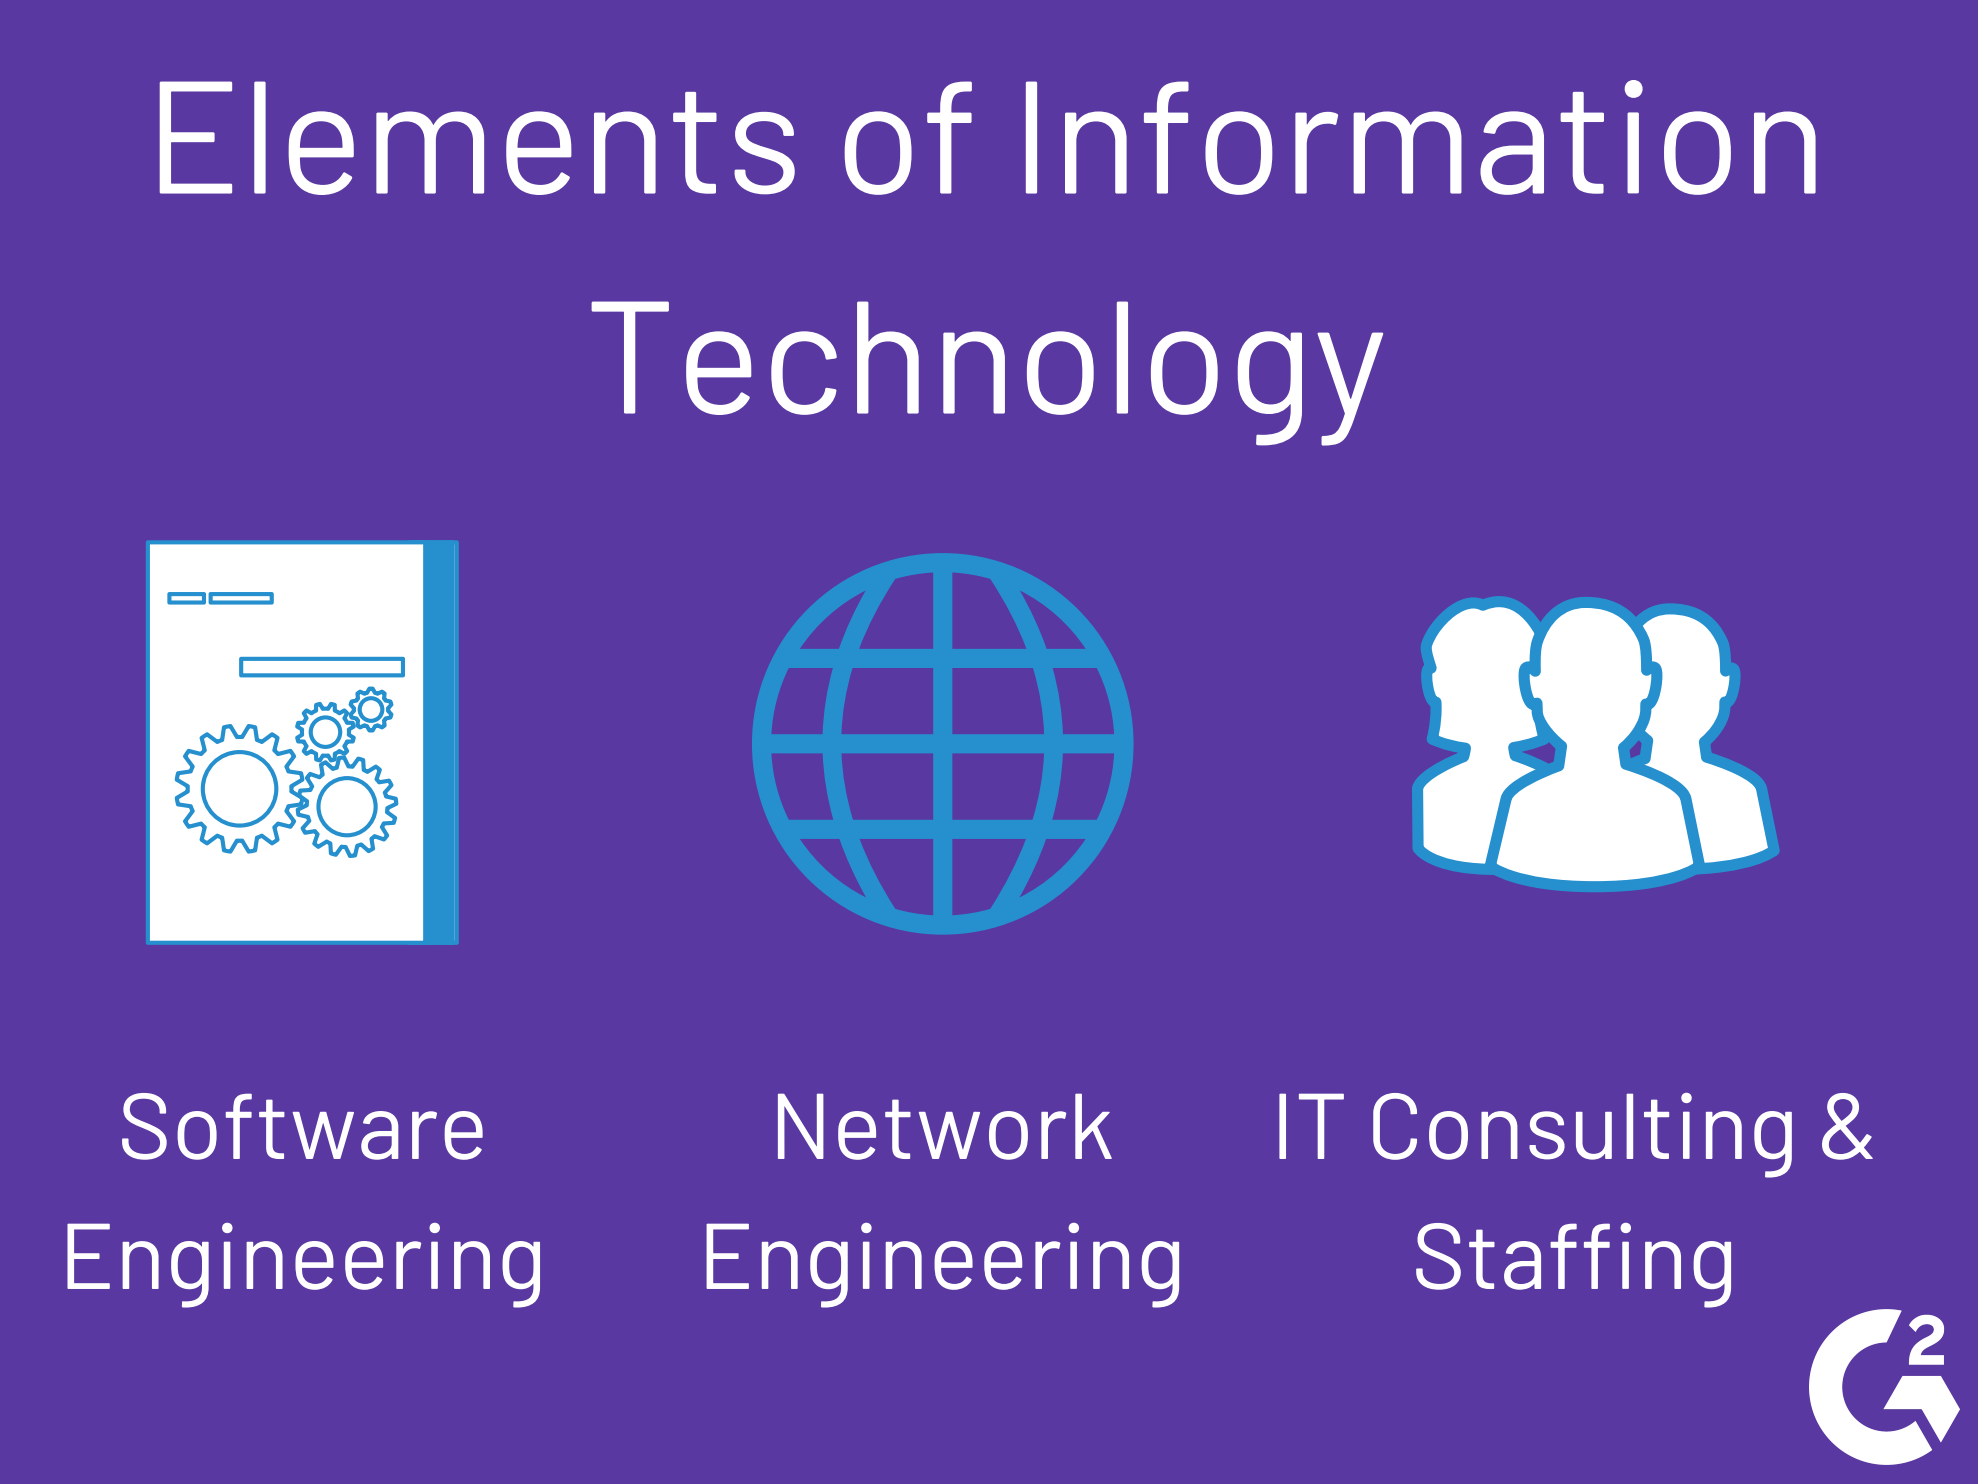 importance of information technology and systems in businesses today